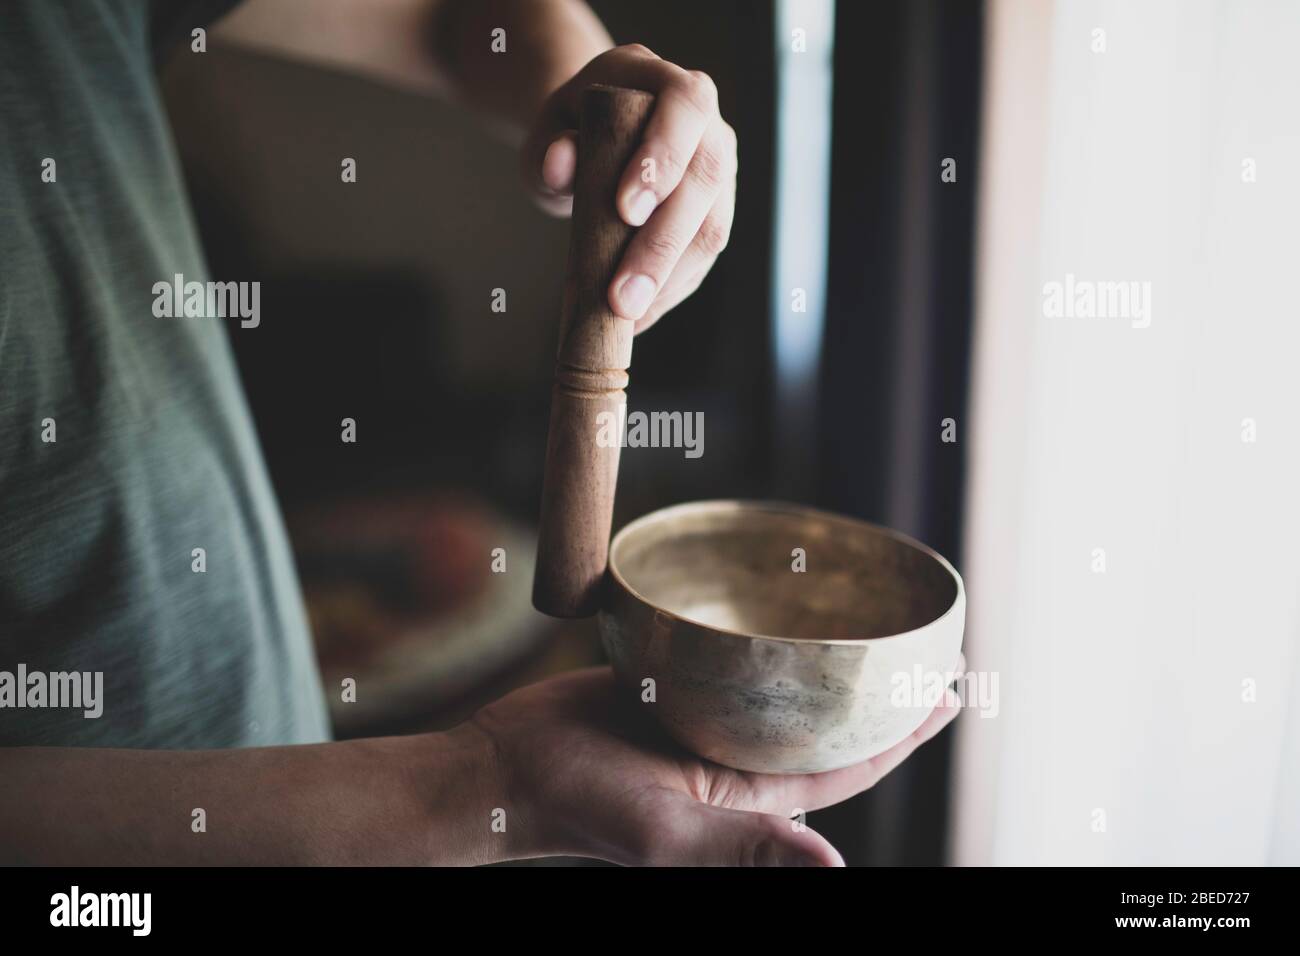 A man reproduces a singing bowl for meditation. Stock Photo